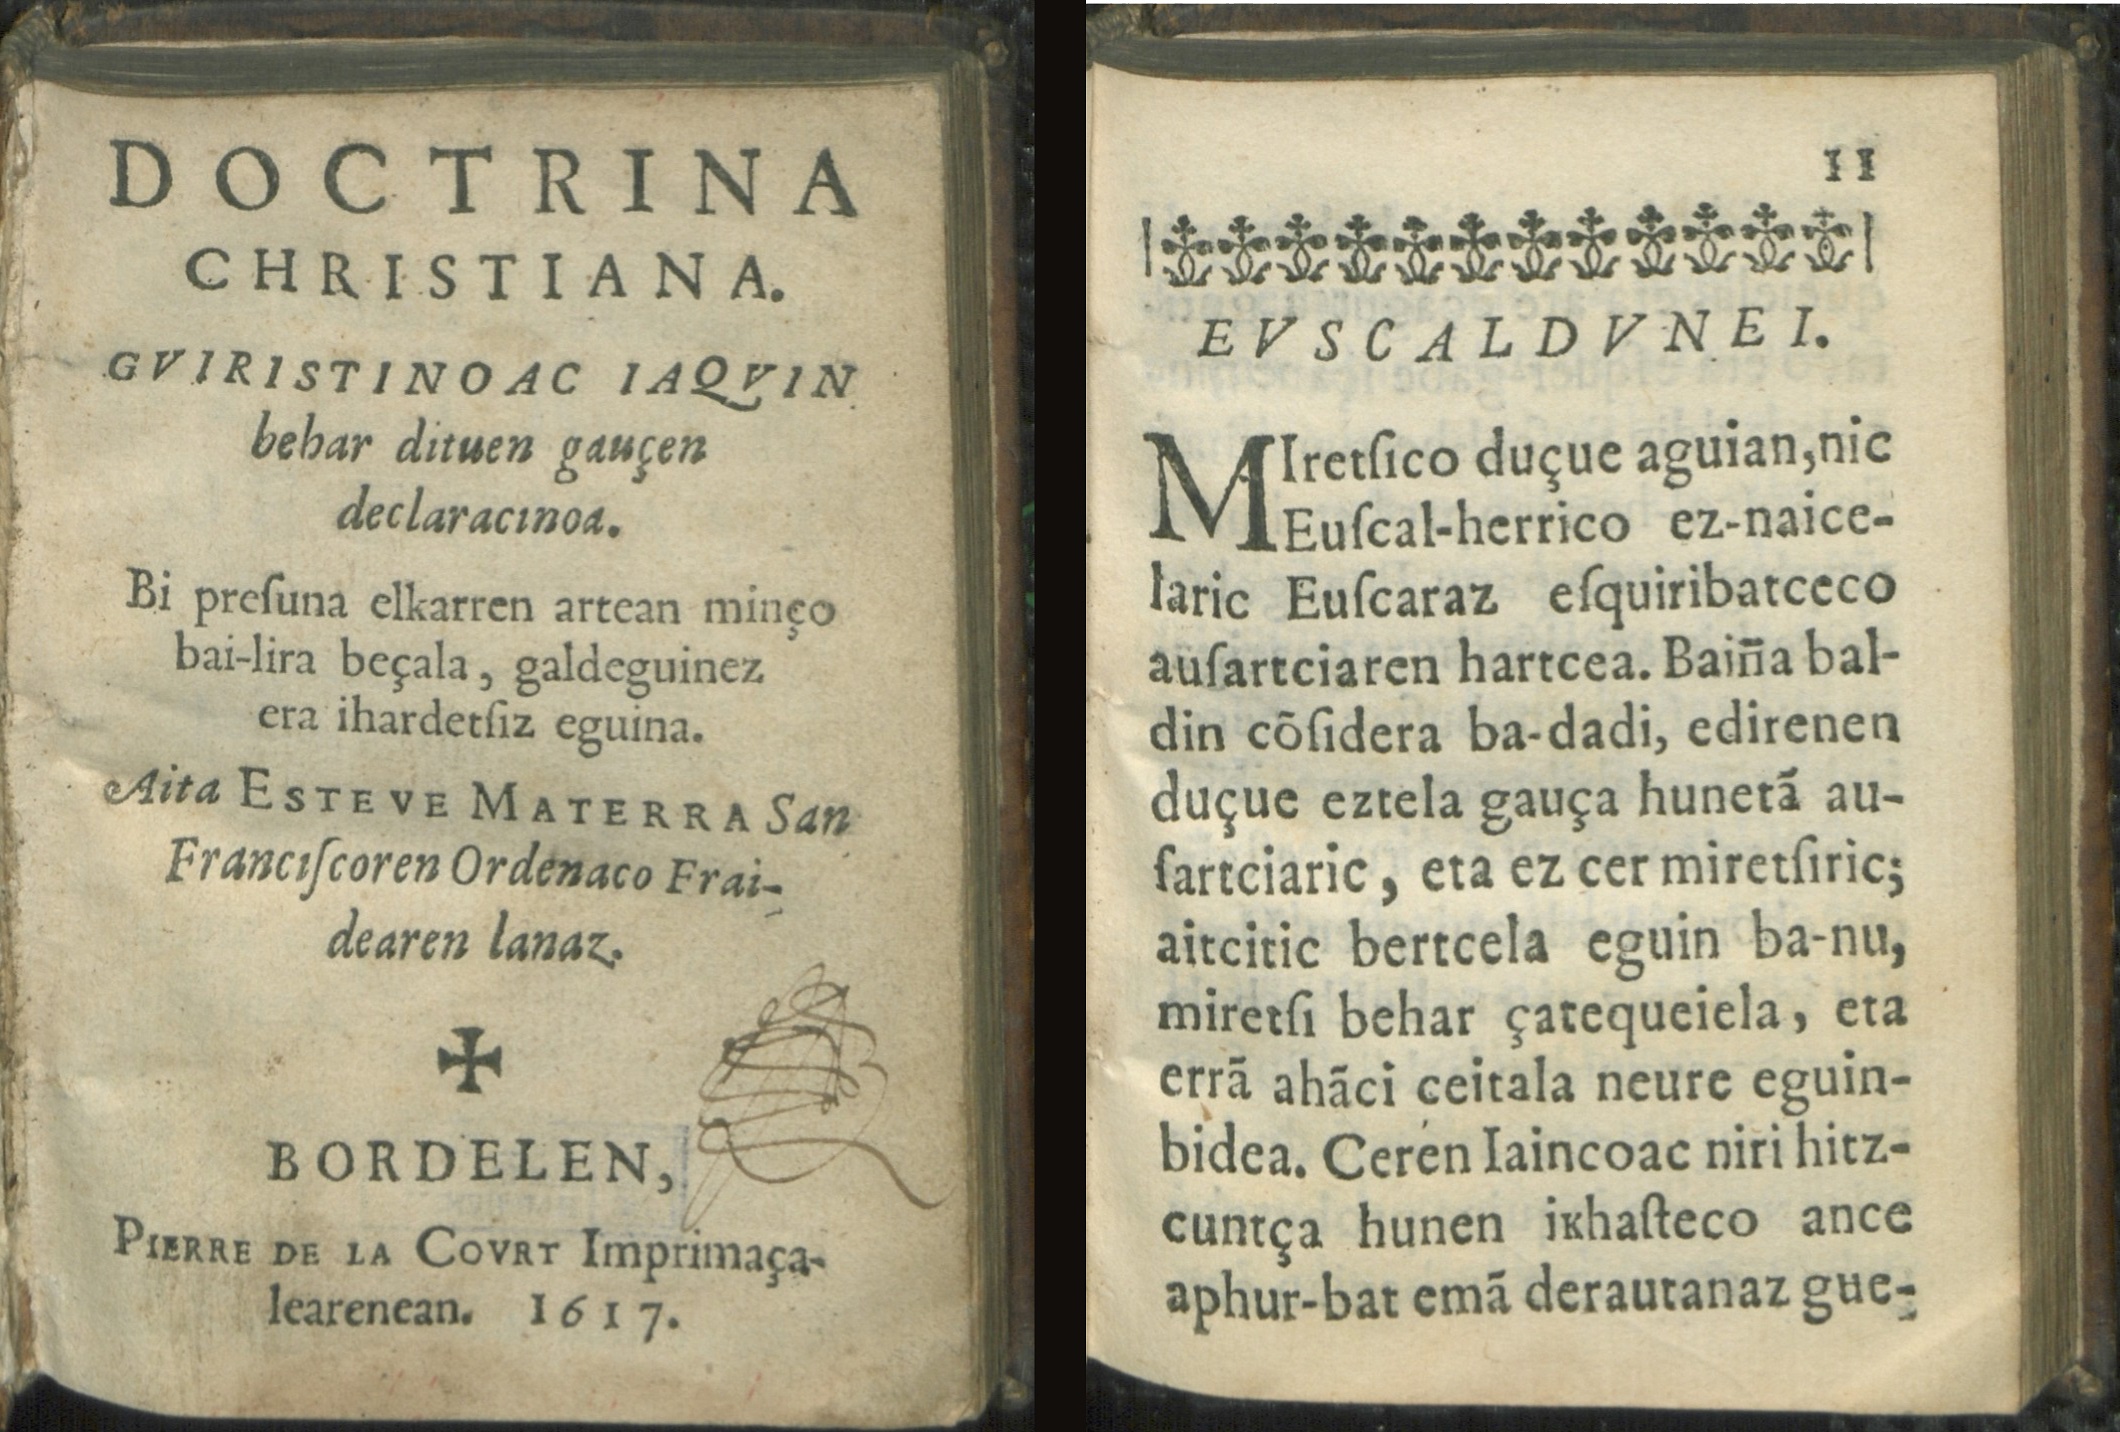 Doctrina Christiana by Esteve Materra, the book the researcher herself came across in Denmark